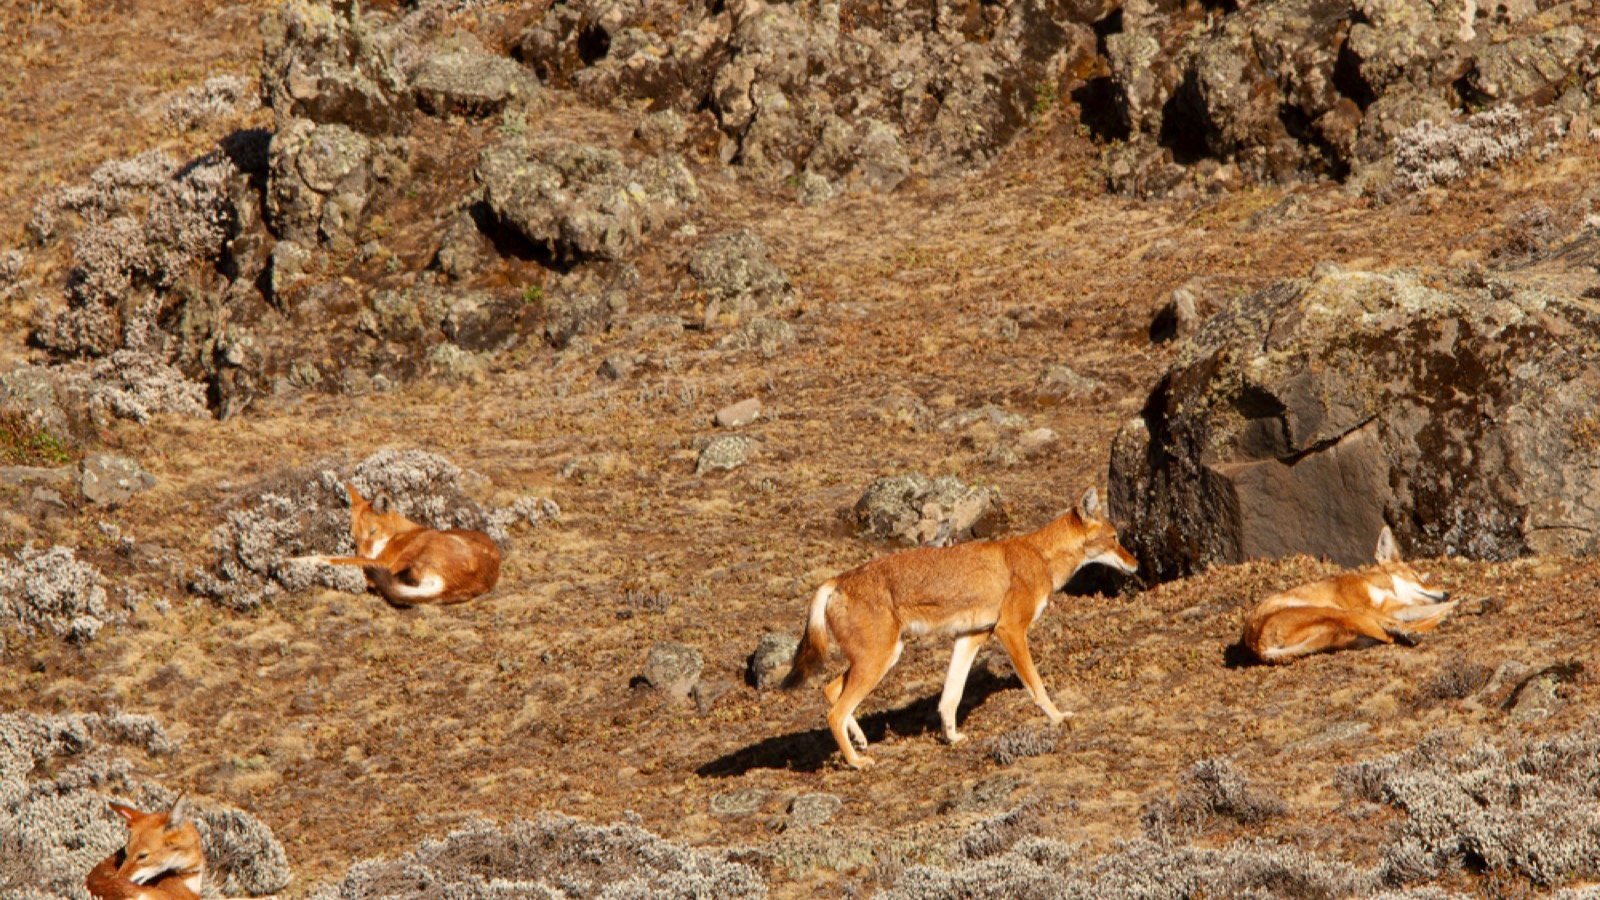 <p>Ethiopia may not be the first location that springs to mind for a wolf experience, but it hosts the Ethiopian wolf, a red-coated beauty closely related to the gray wolf. Sadly, this magnificent animal is in great danger of extinction, with only 500 remaining in the wild. As one of Africa’s rarest carnivores, seeing them in their natural habitat is a privilege.</p>